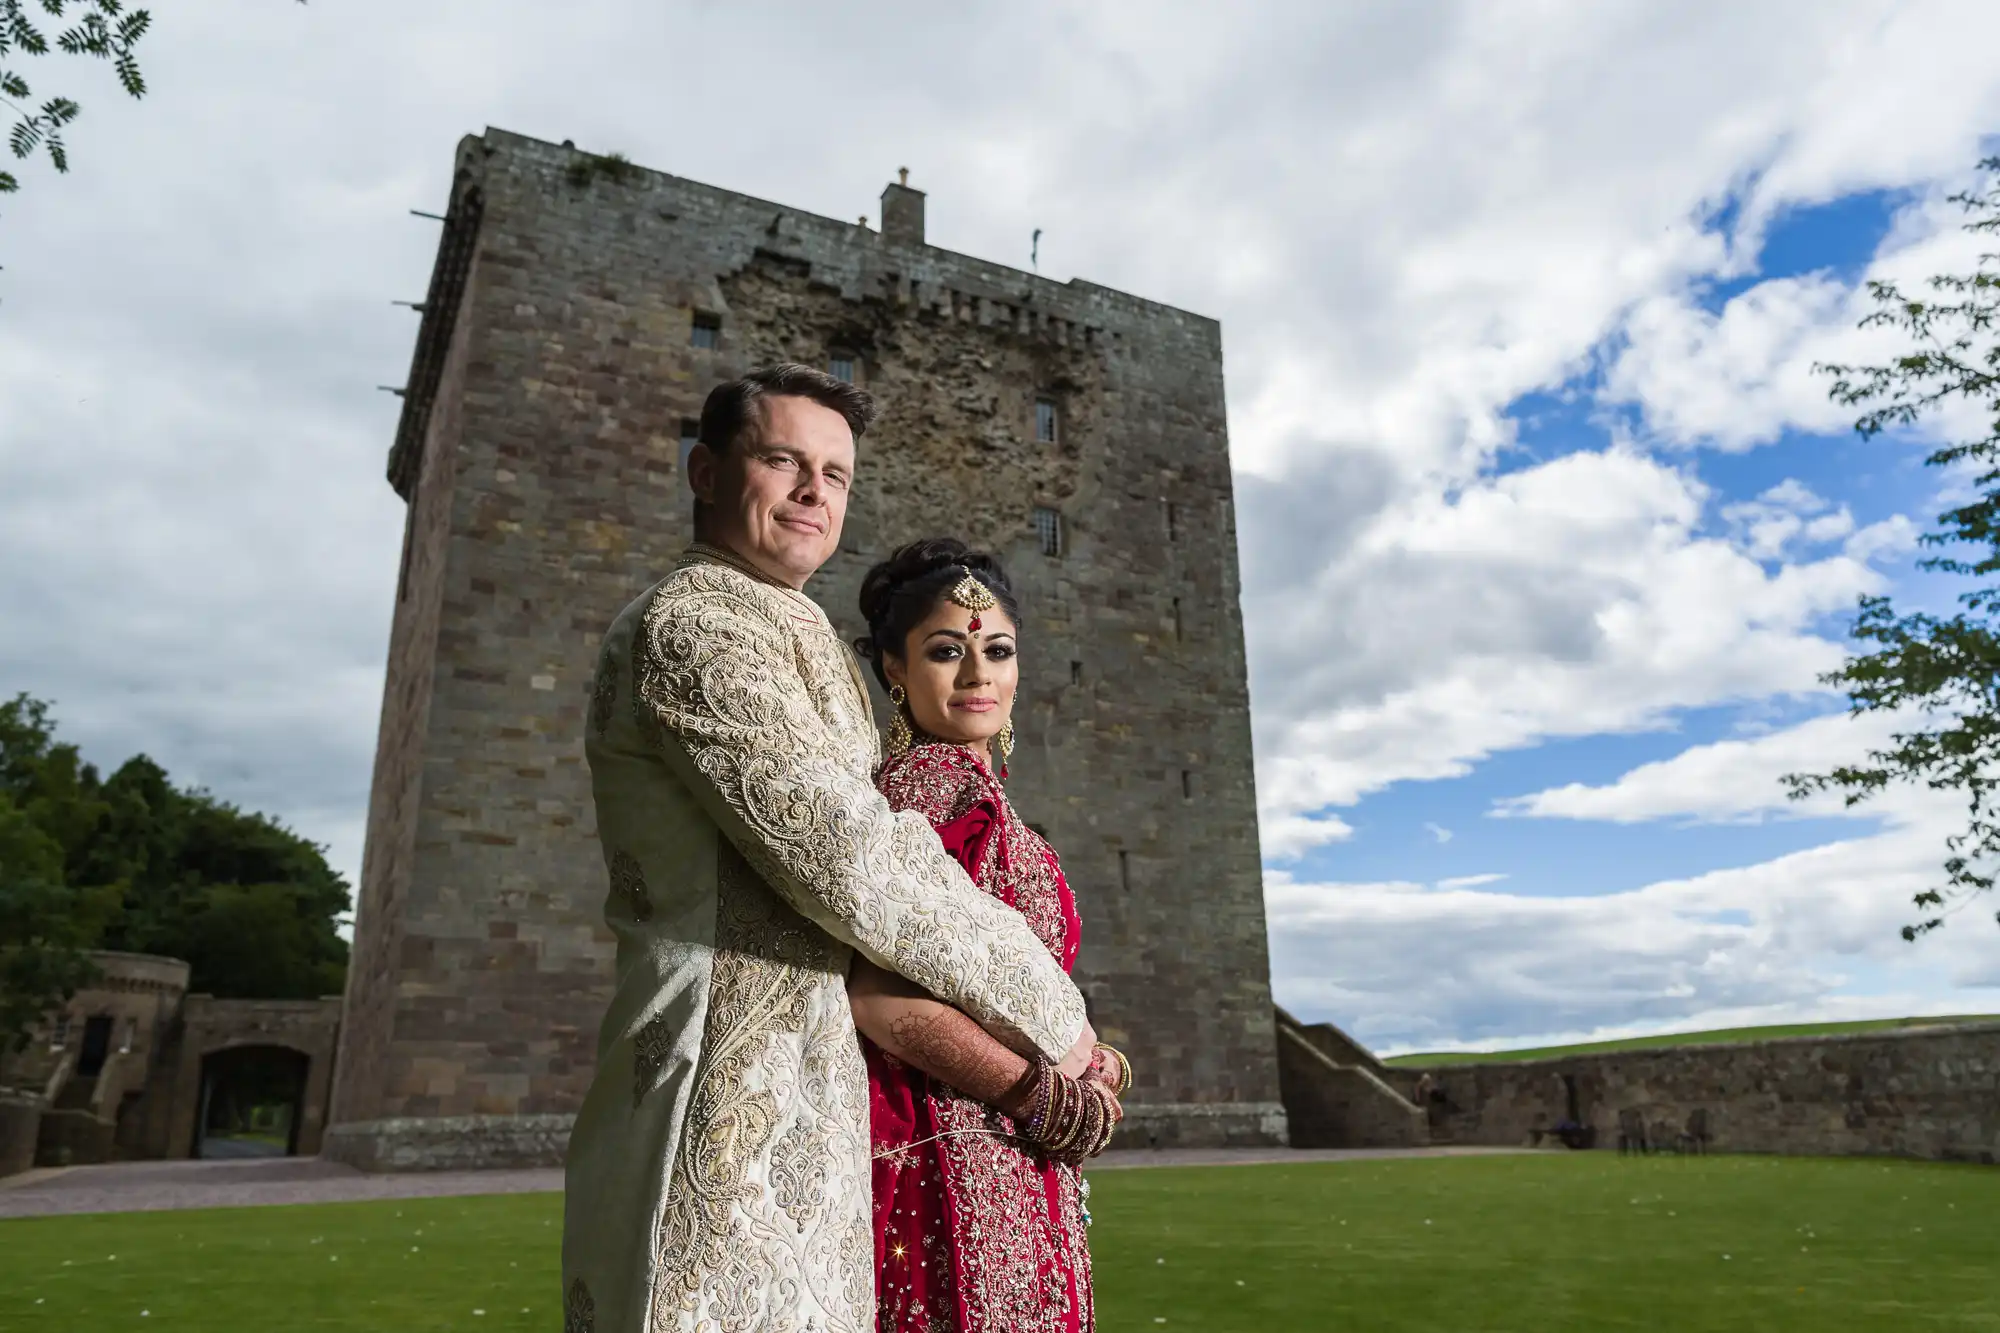 A couple, dressed in traditional attire, stand arm in arm with a historic castle building and a clear sky in the background.